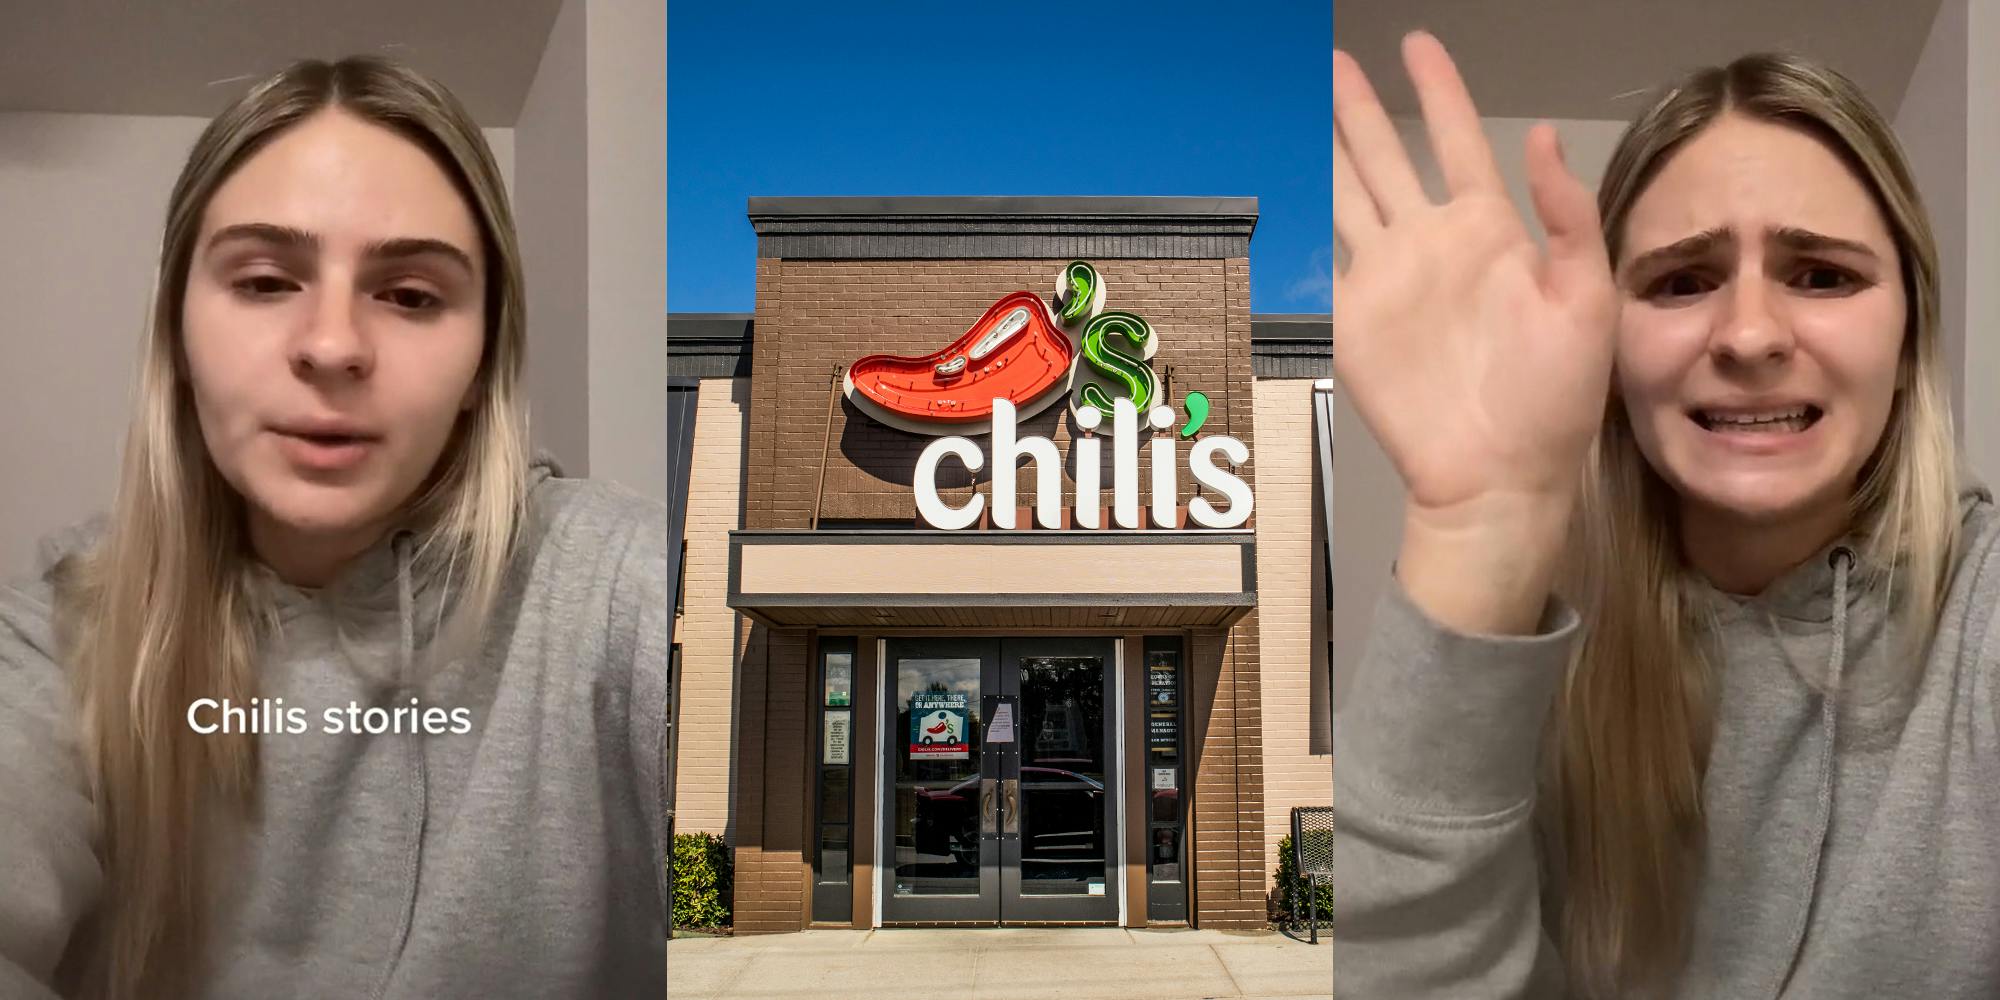 former Chili's employee speaking caption "Chilis stories" (l) Chili's sign on building (c) former Chili's employee speaking with hand up (r)